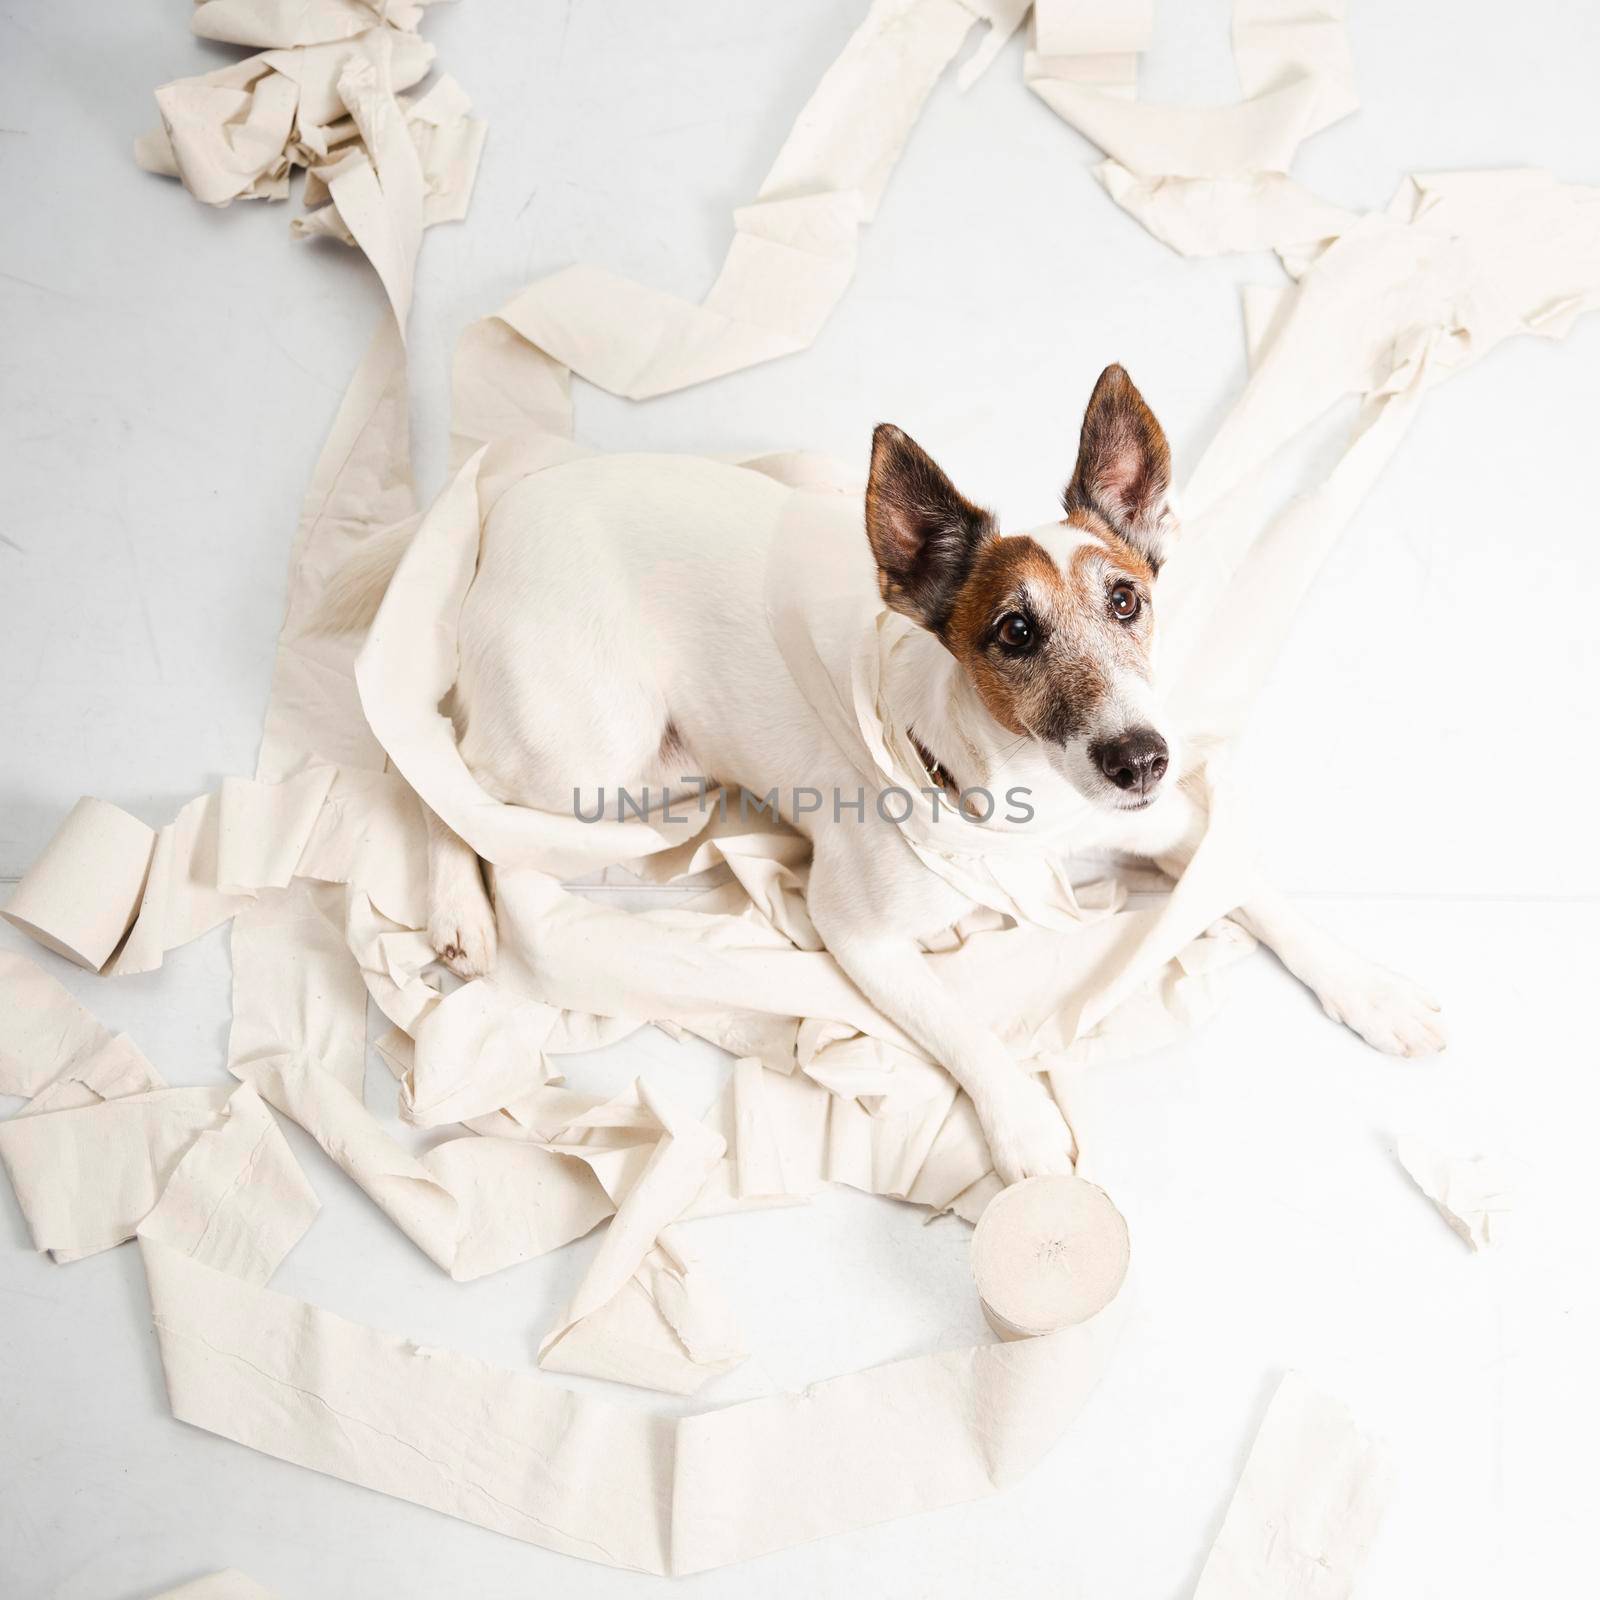 cute dog making huge mess with rolling paper. High resolution photo